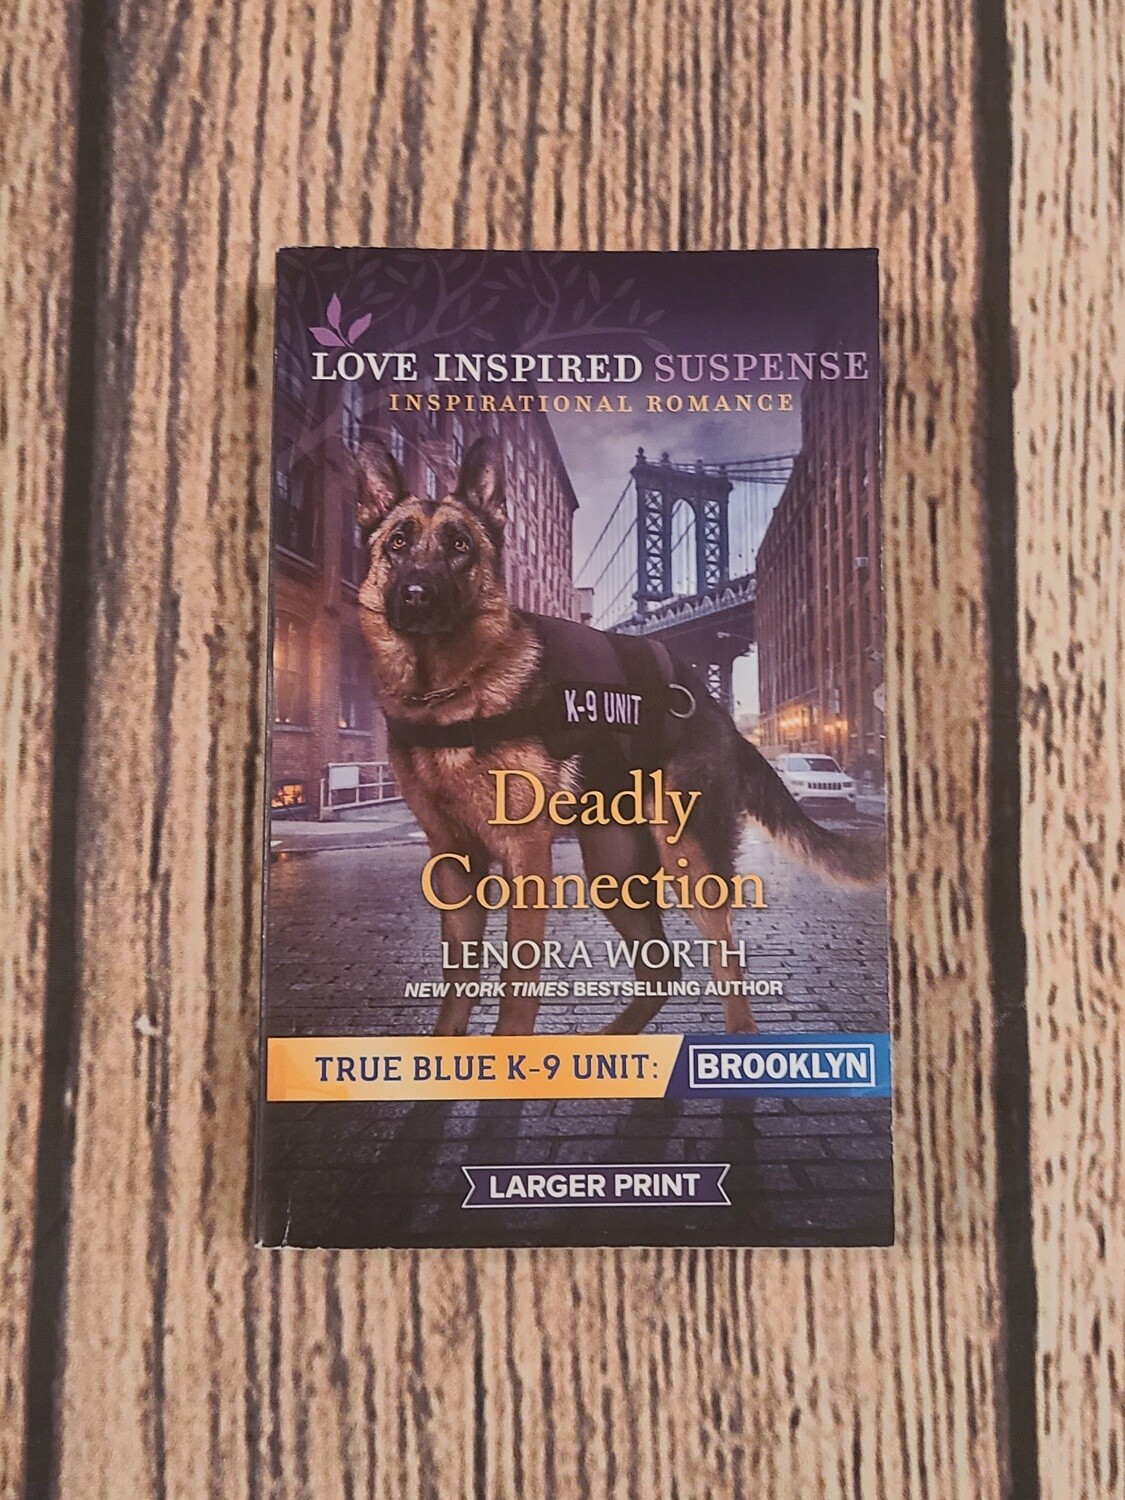 True Blue K-9 Unit: Brooklyn - Deadly Connection by Lenora Worth - Larger Print - Great Condition